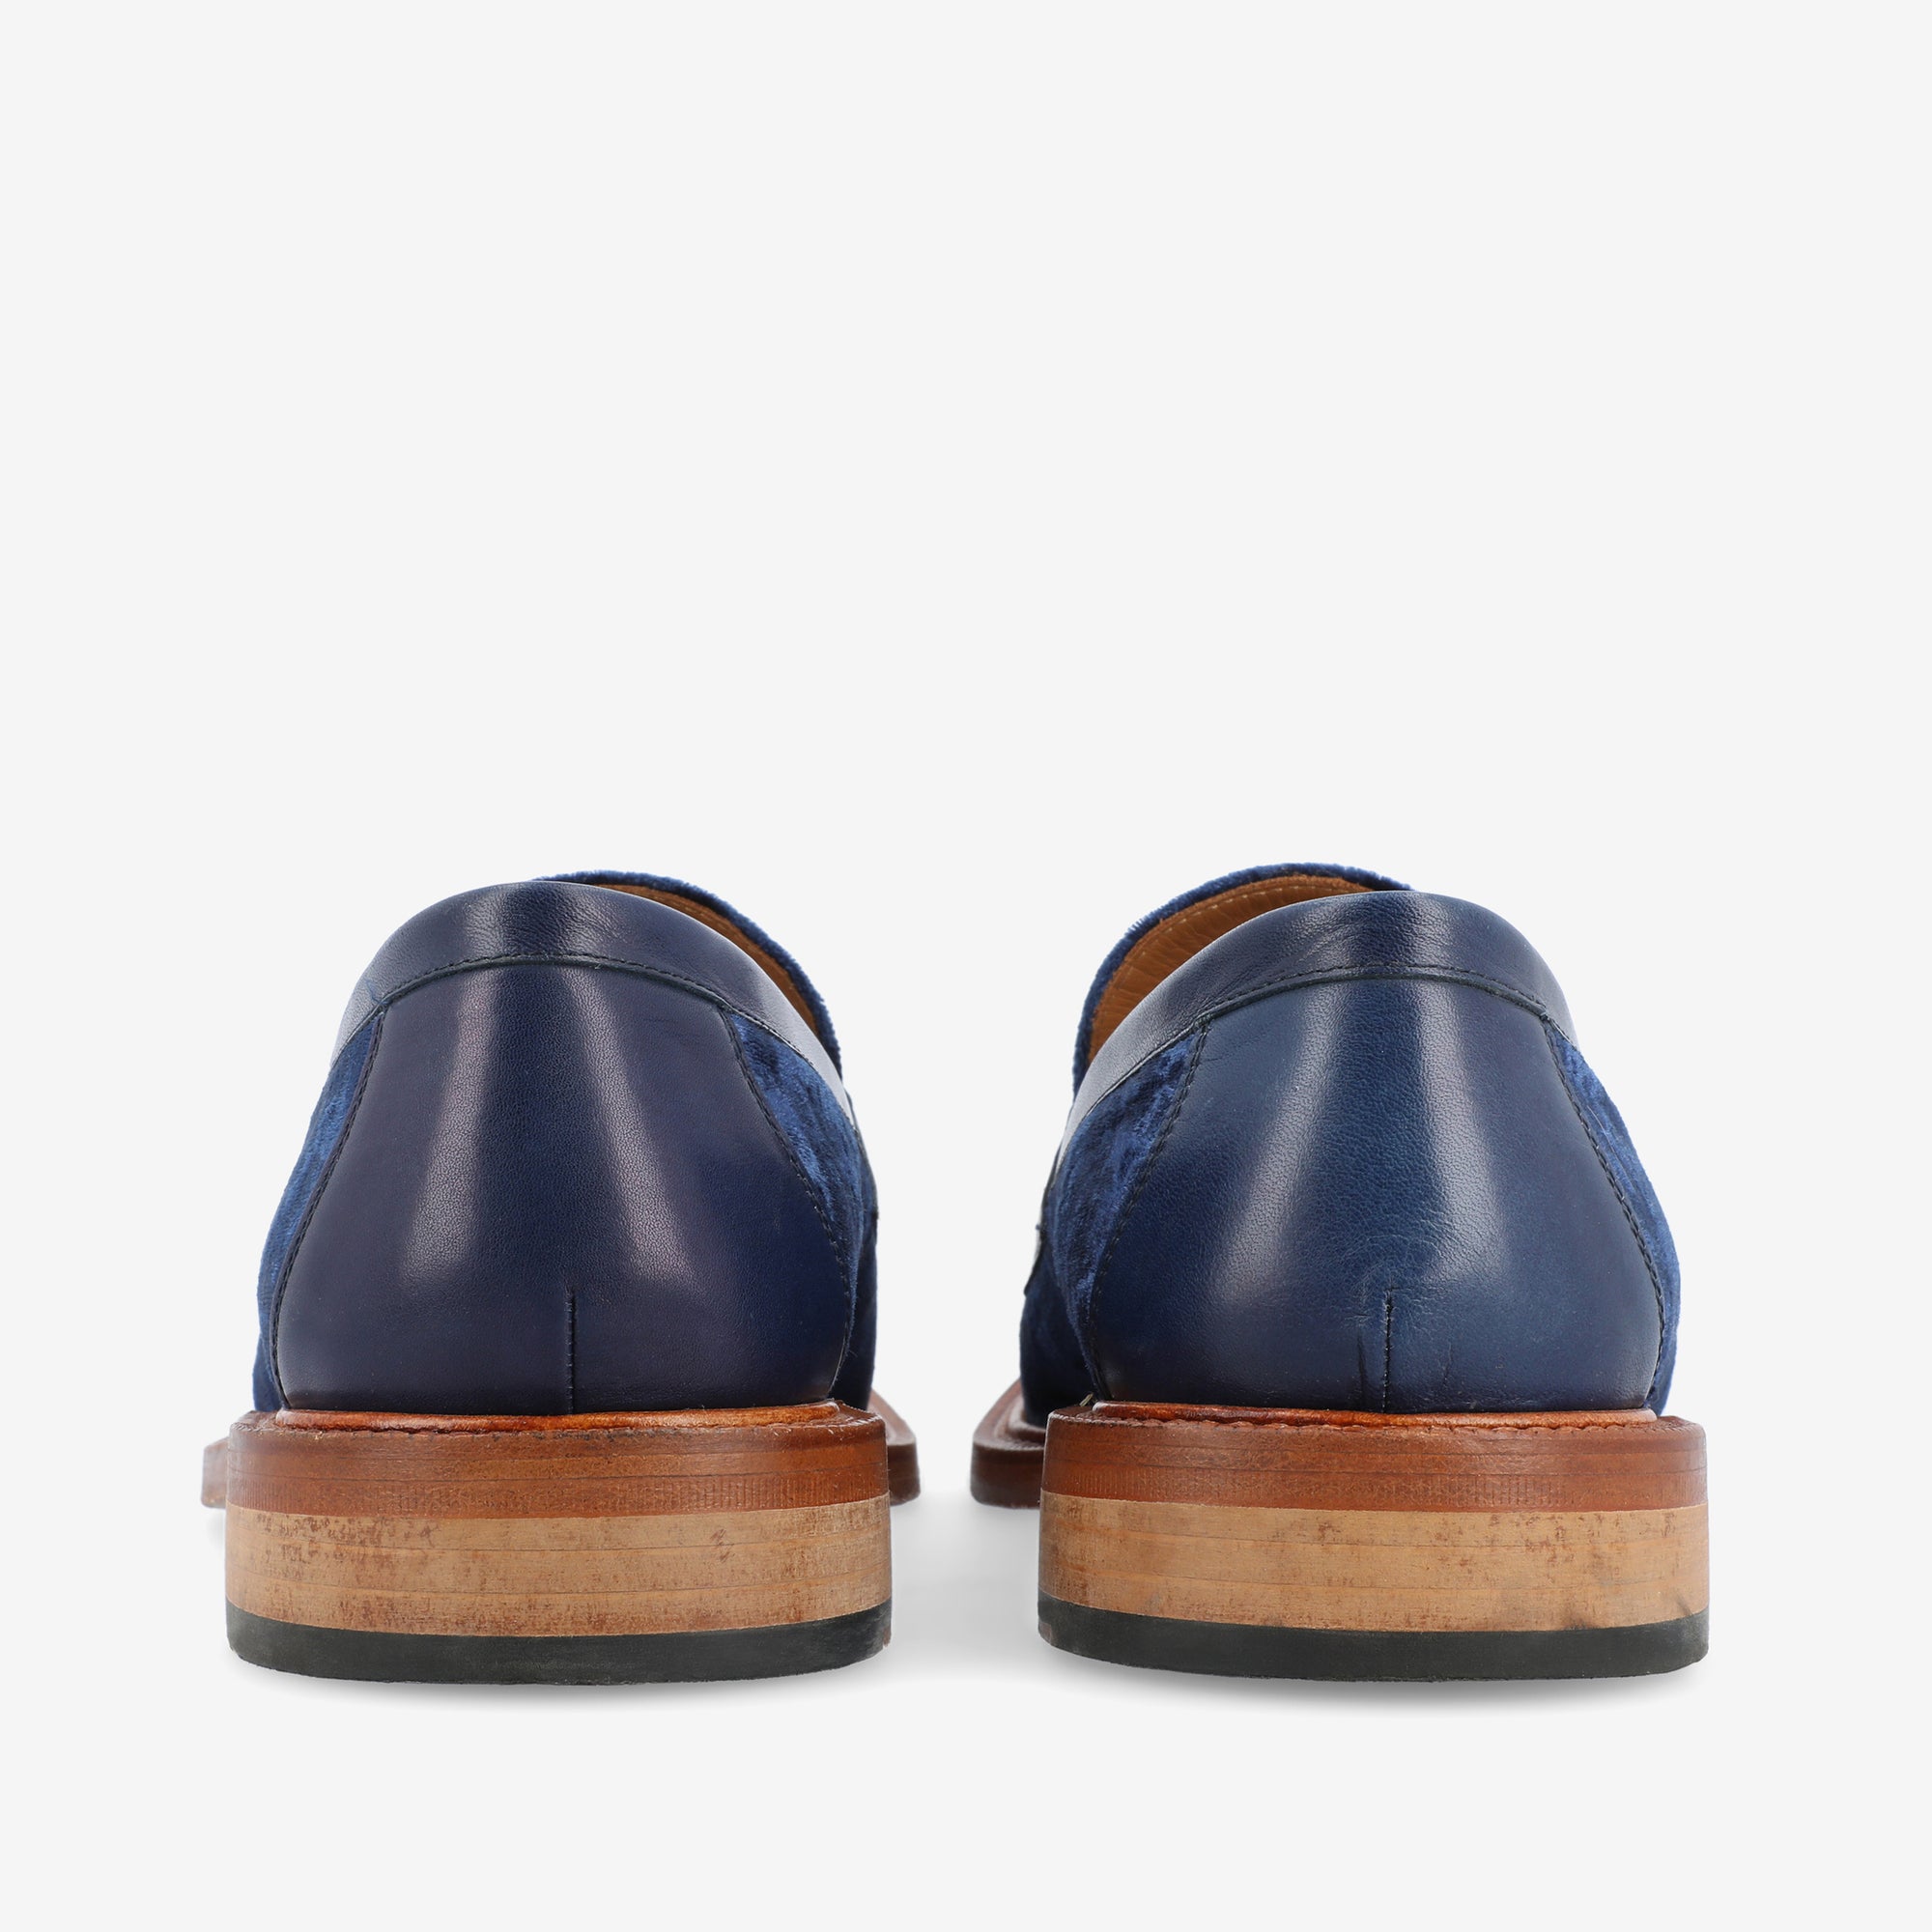 The Fitz Loafer in Deep Azure